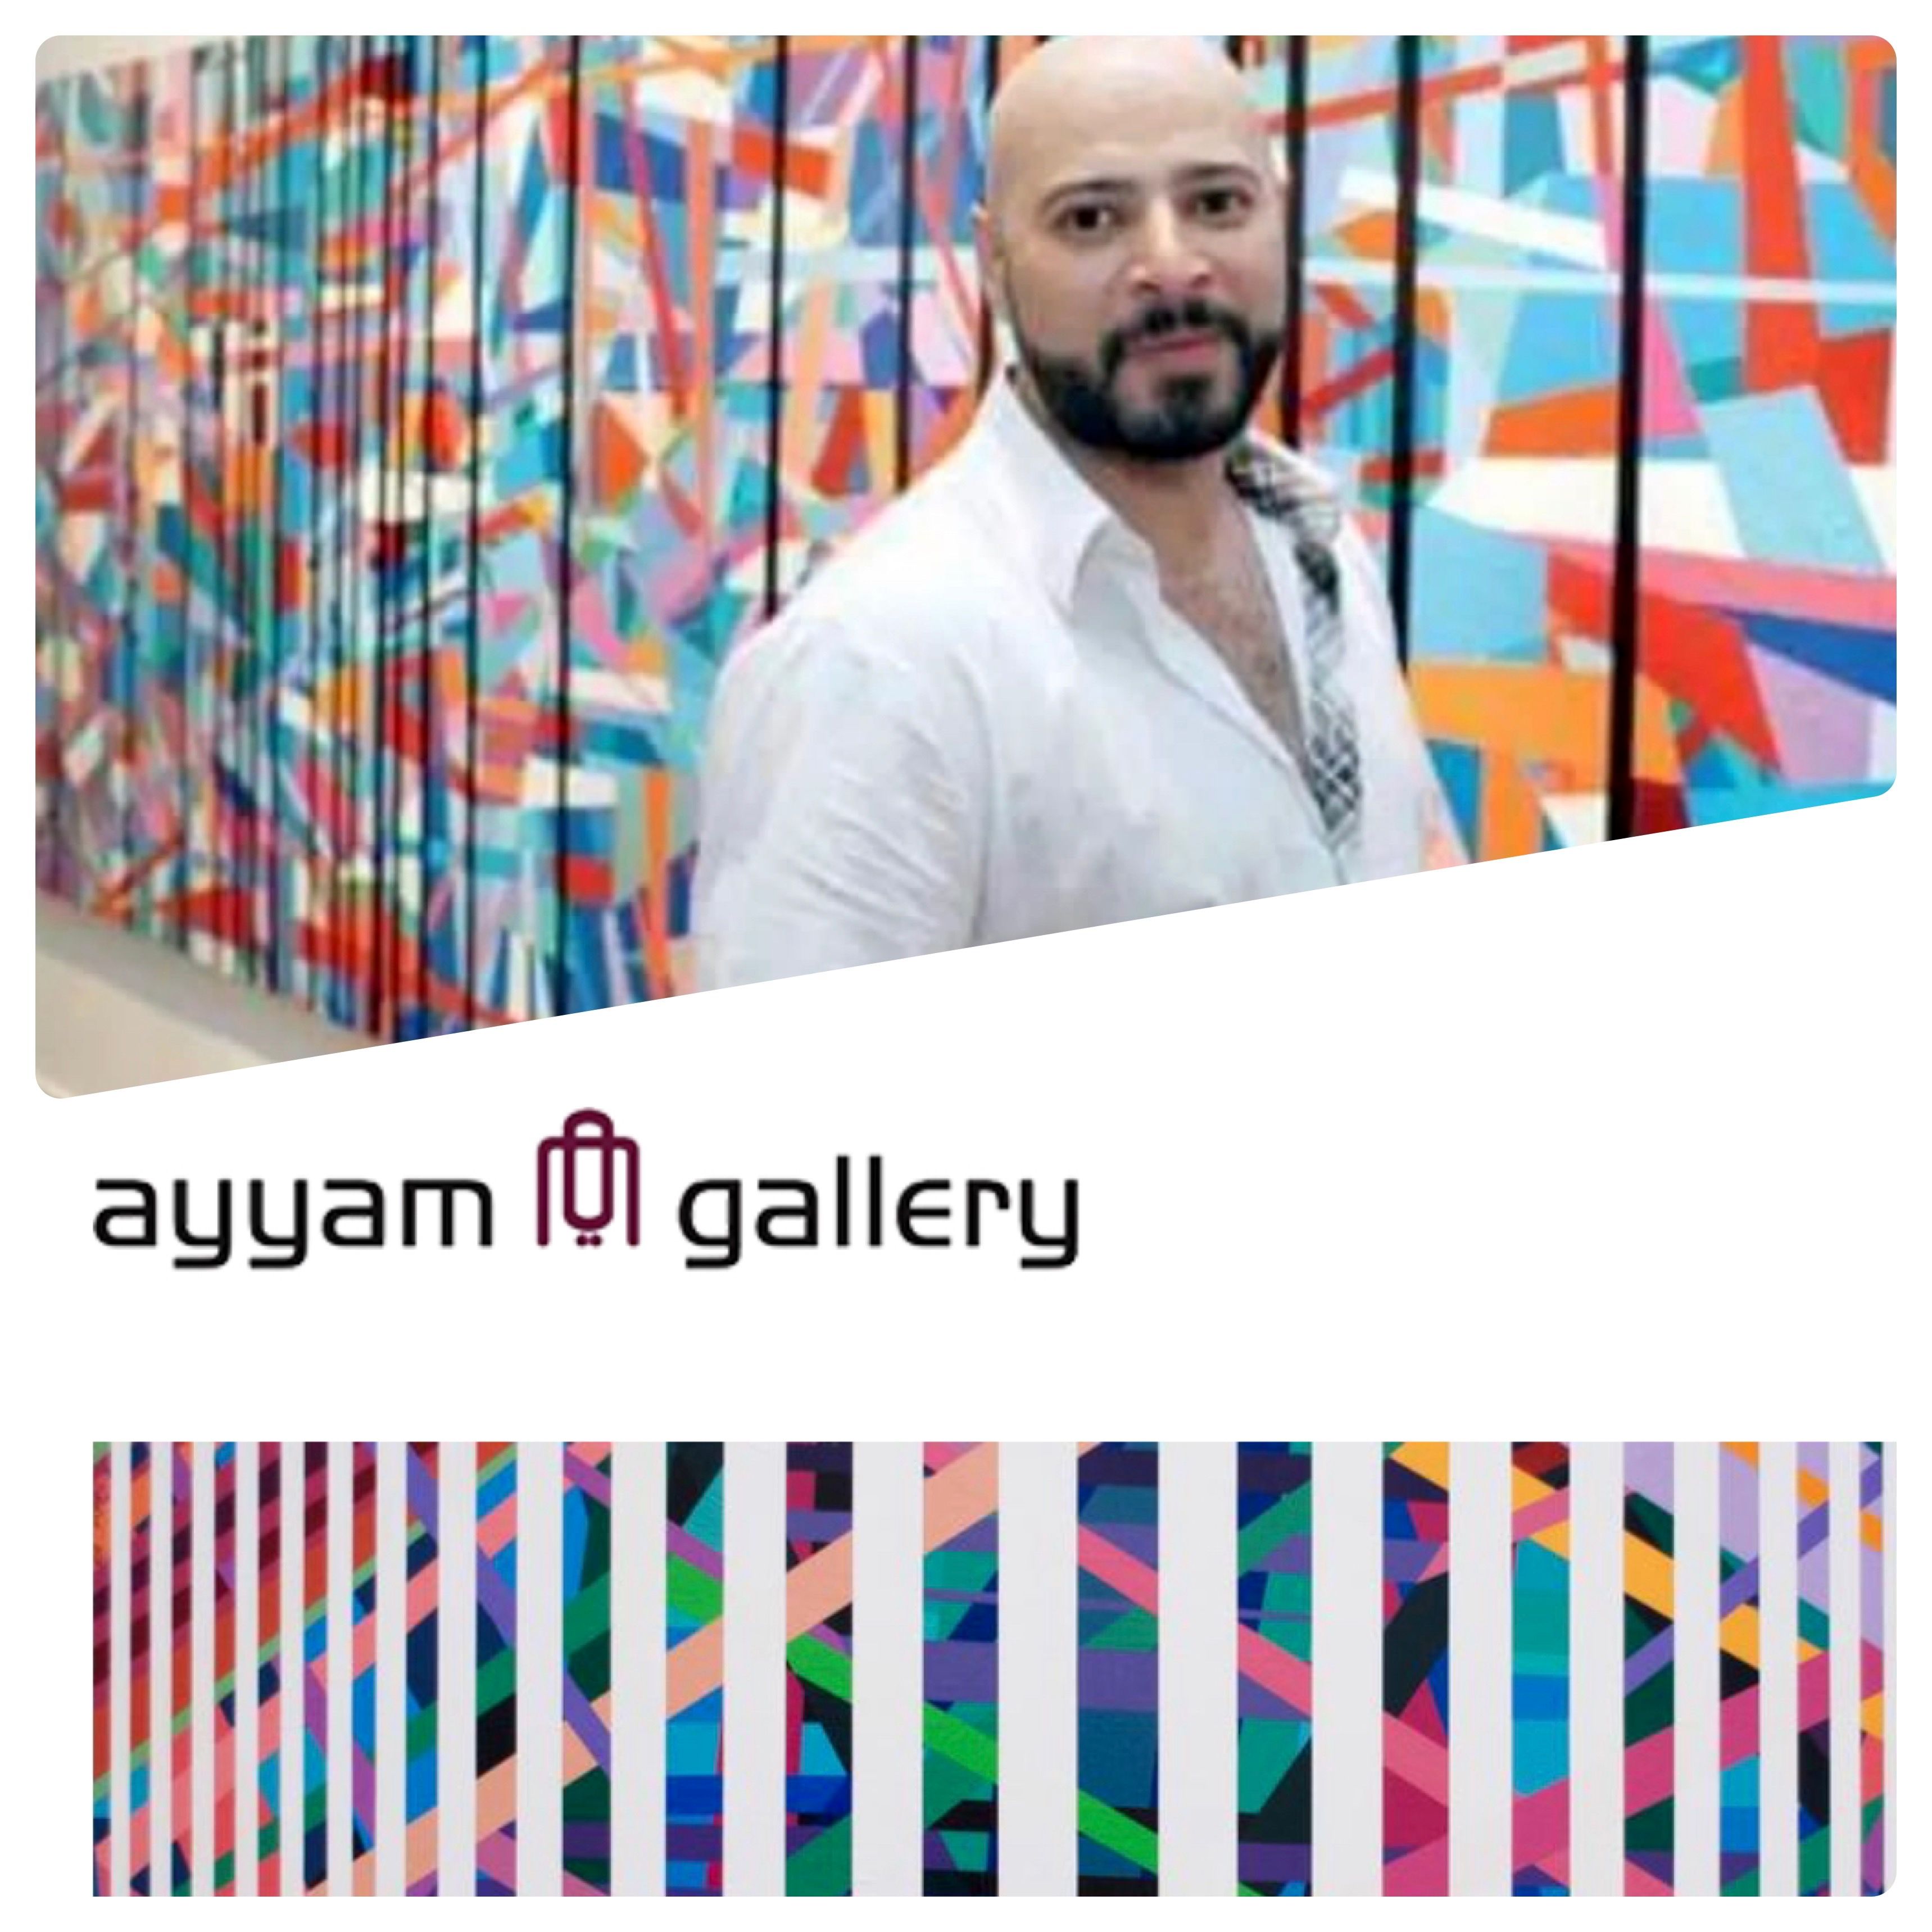 "The Common Pursuit of Happiness "in Ayyam Gallery Dubai